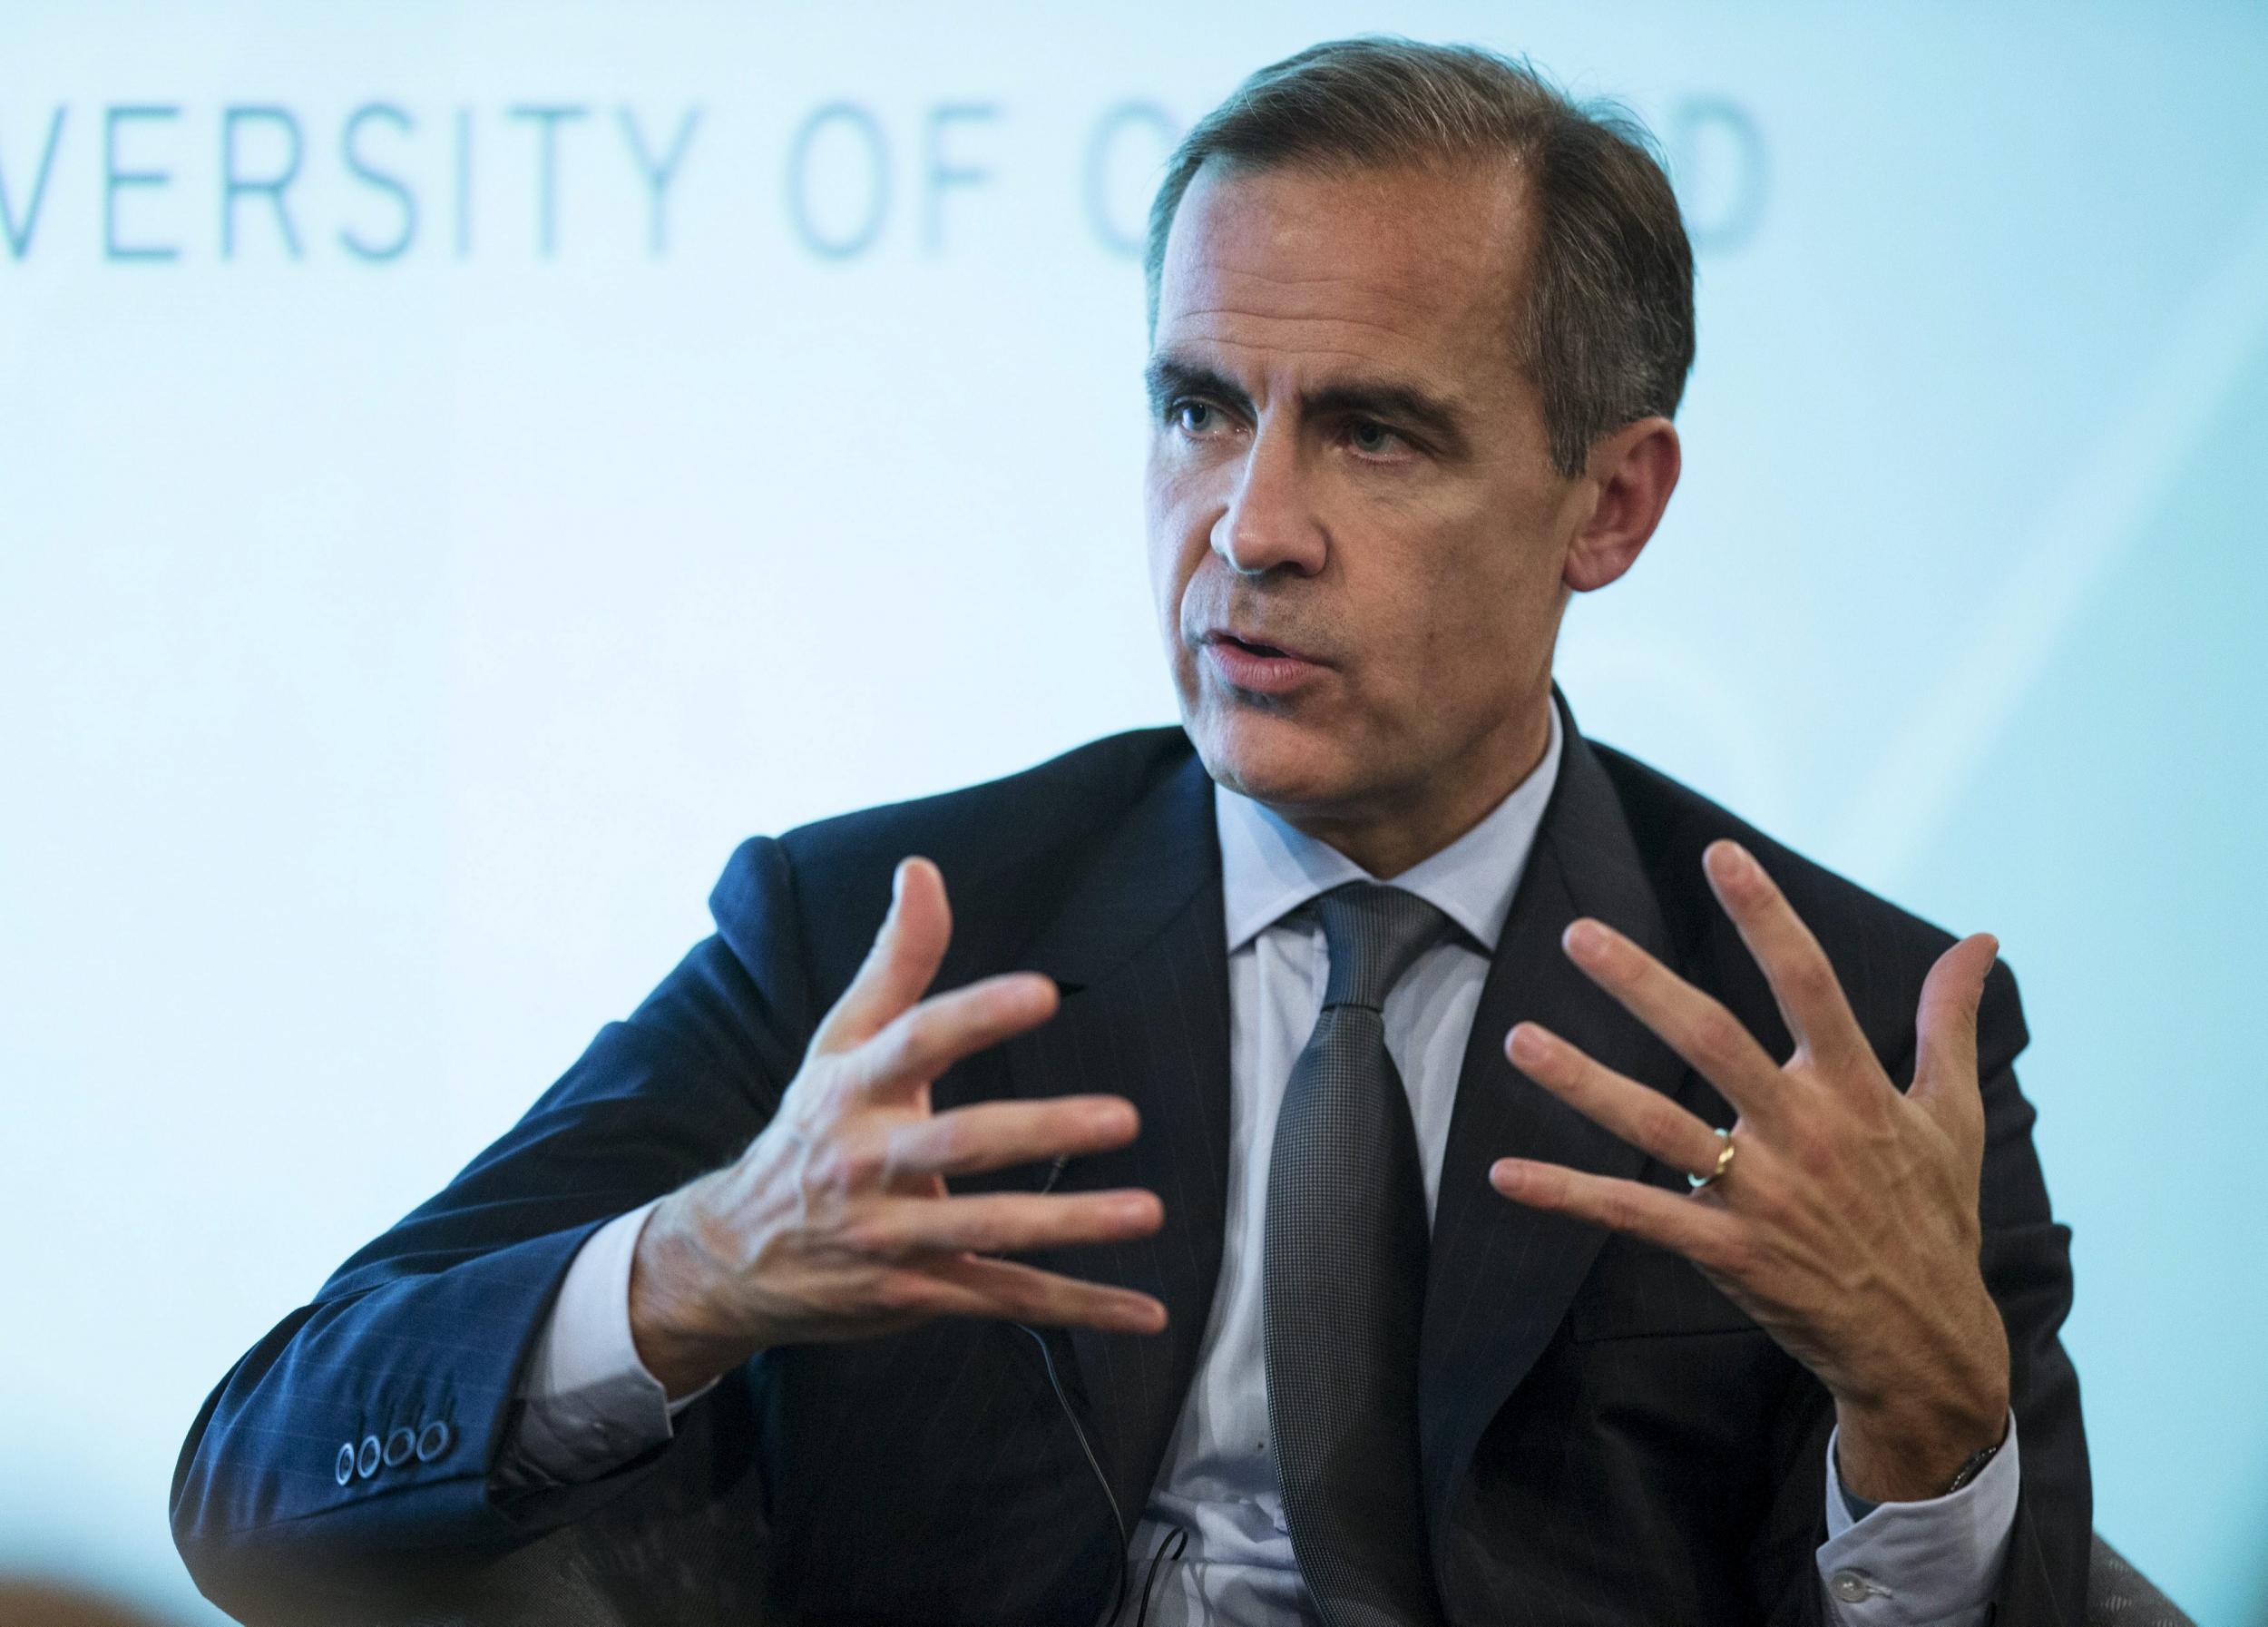 Mark Carney has cautioned politicians against assuming that central banks can stimulate their economies through negative interest rates or more quantitative easing